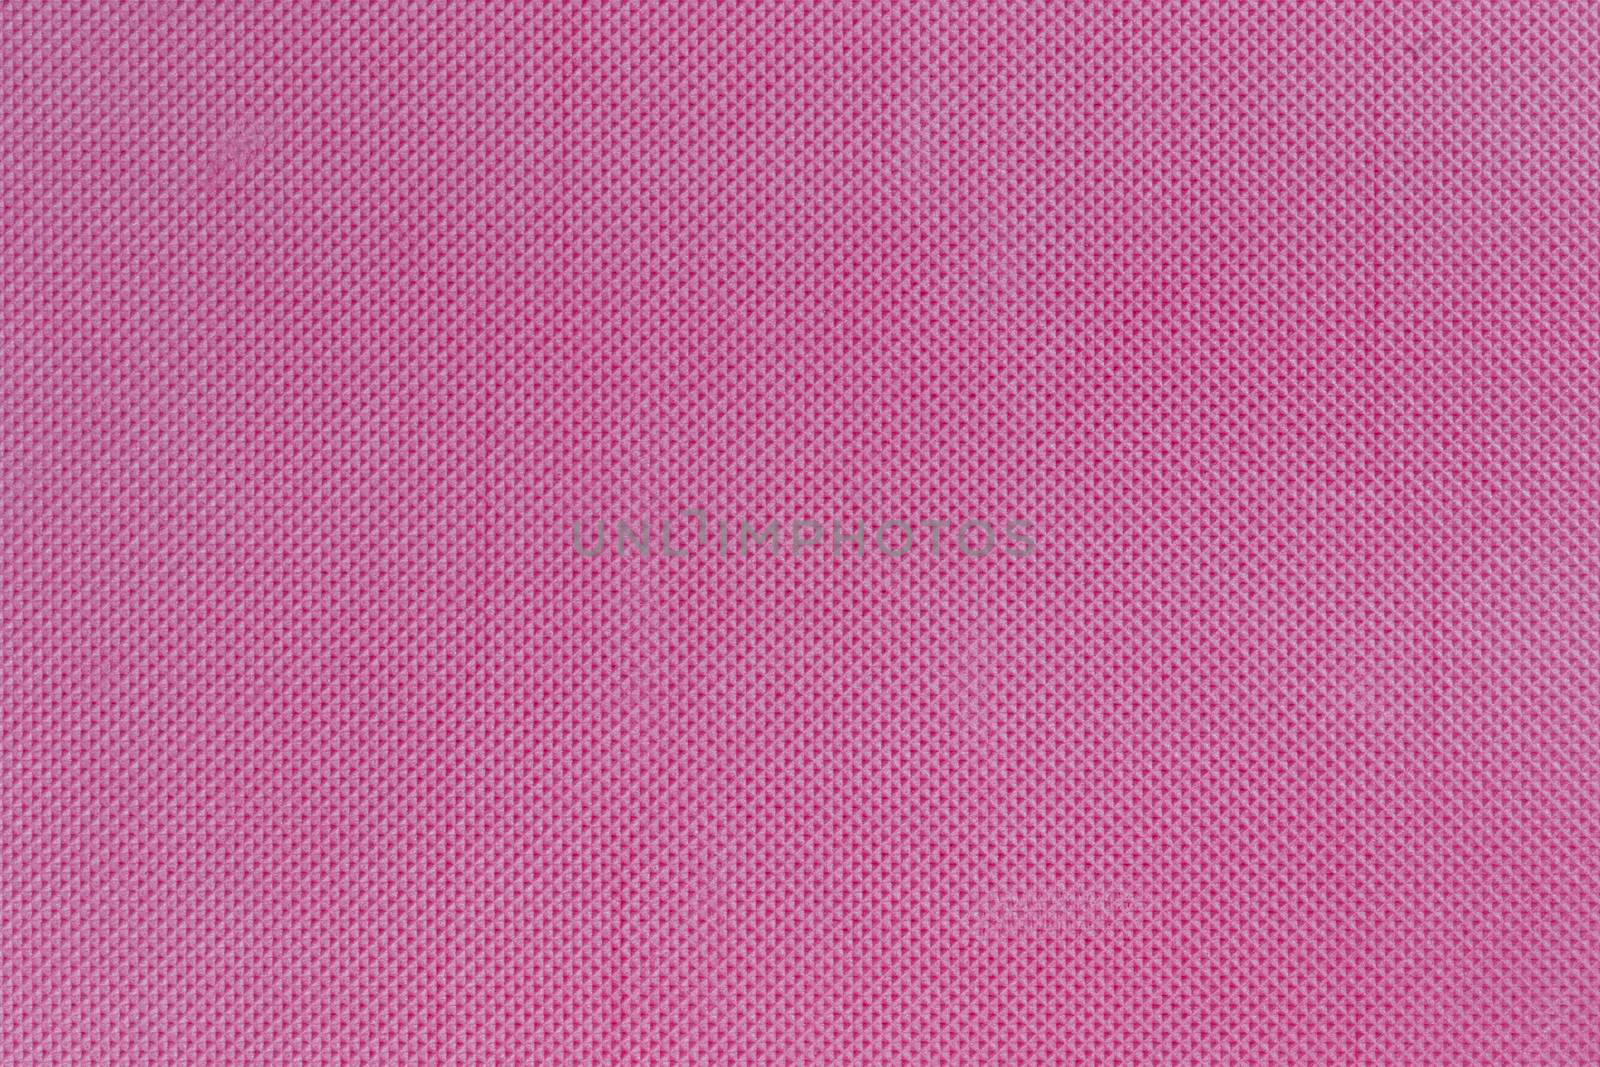 pink sport or yoga foam mat surface flat texture and background.